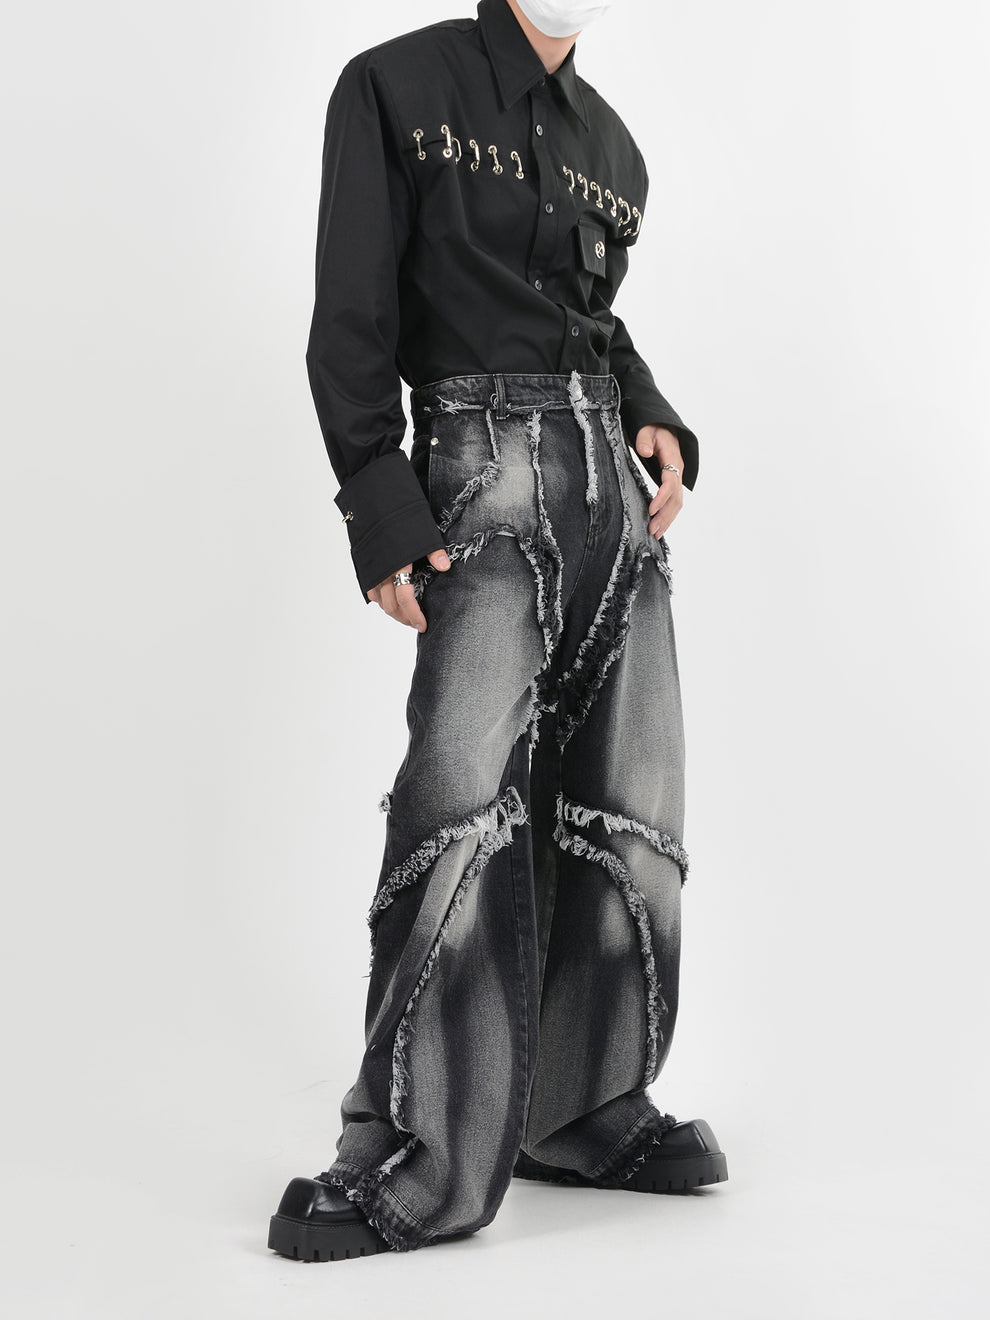 Urban Edge: Deconstructed Distressed Jeans for Unmatched Style ...